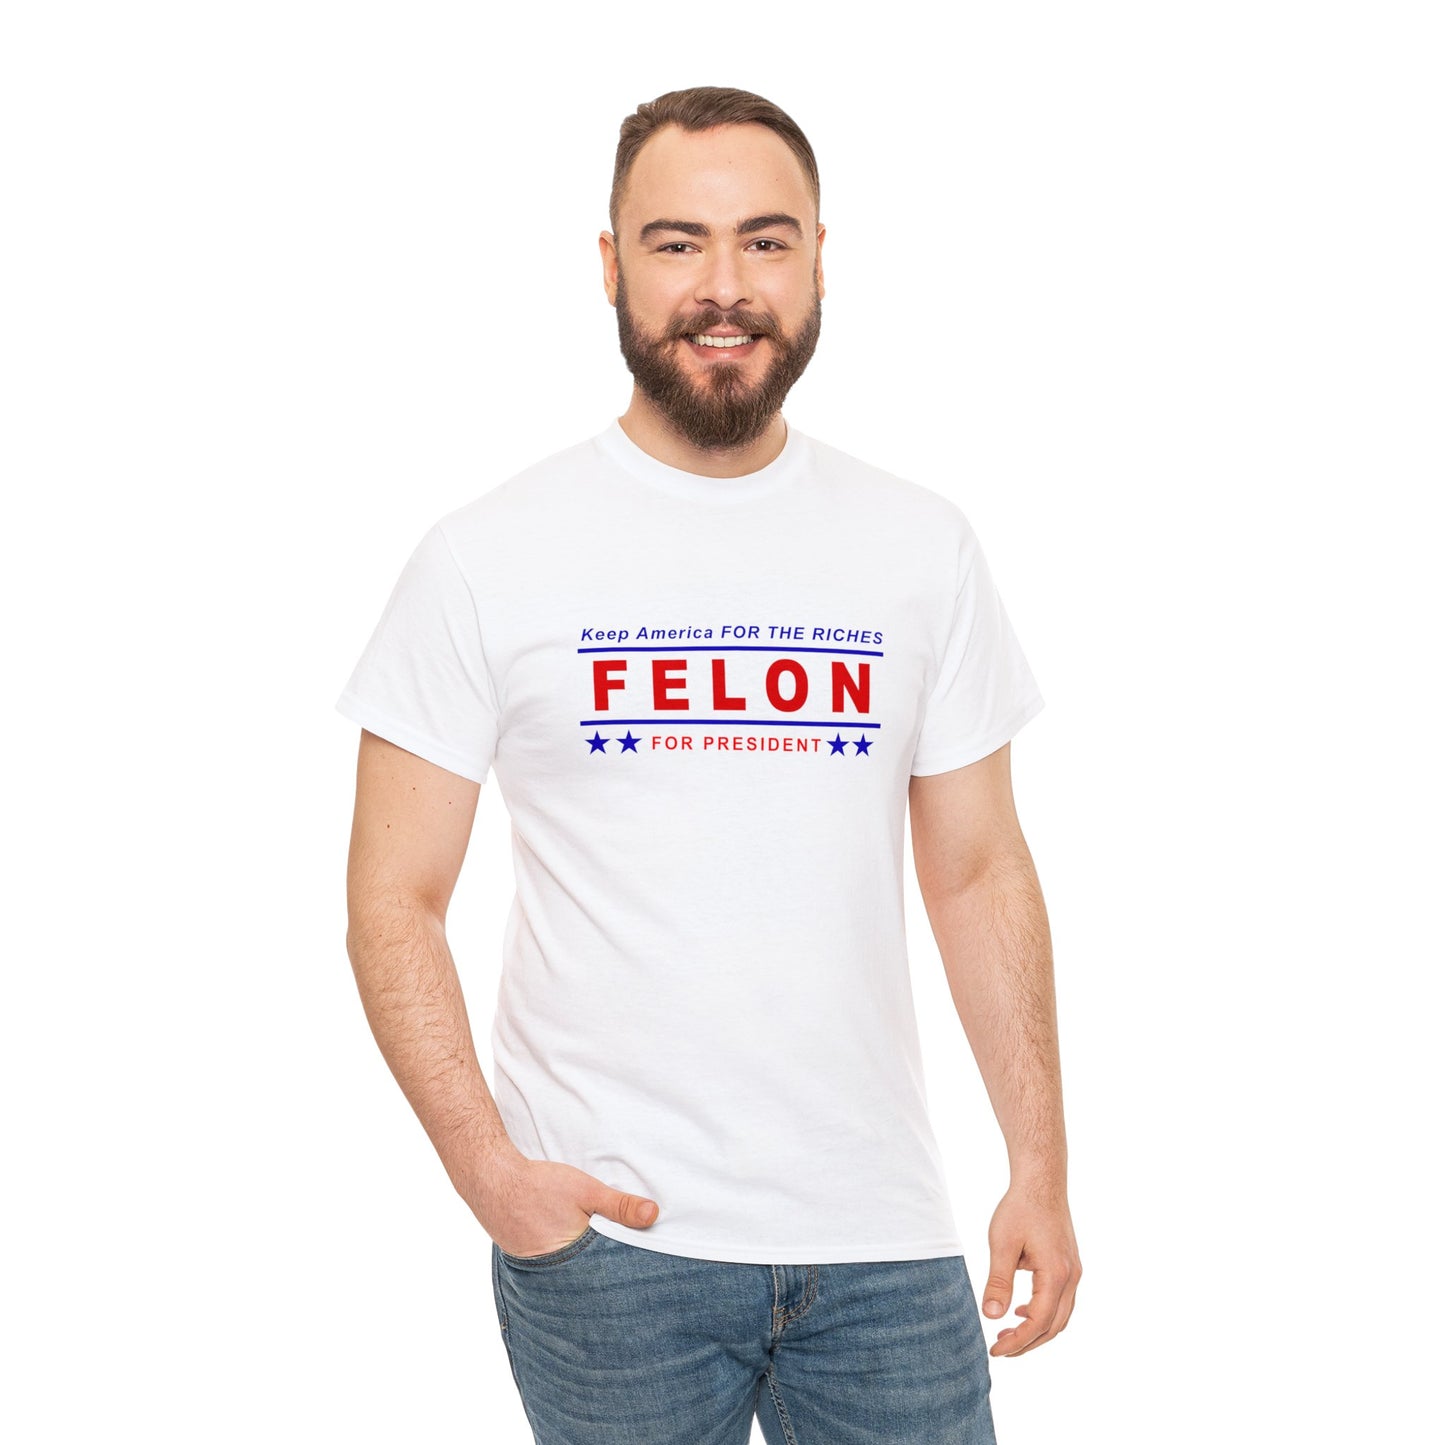 Keep American For the Riches | Felon for President | Political T-Shirt